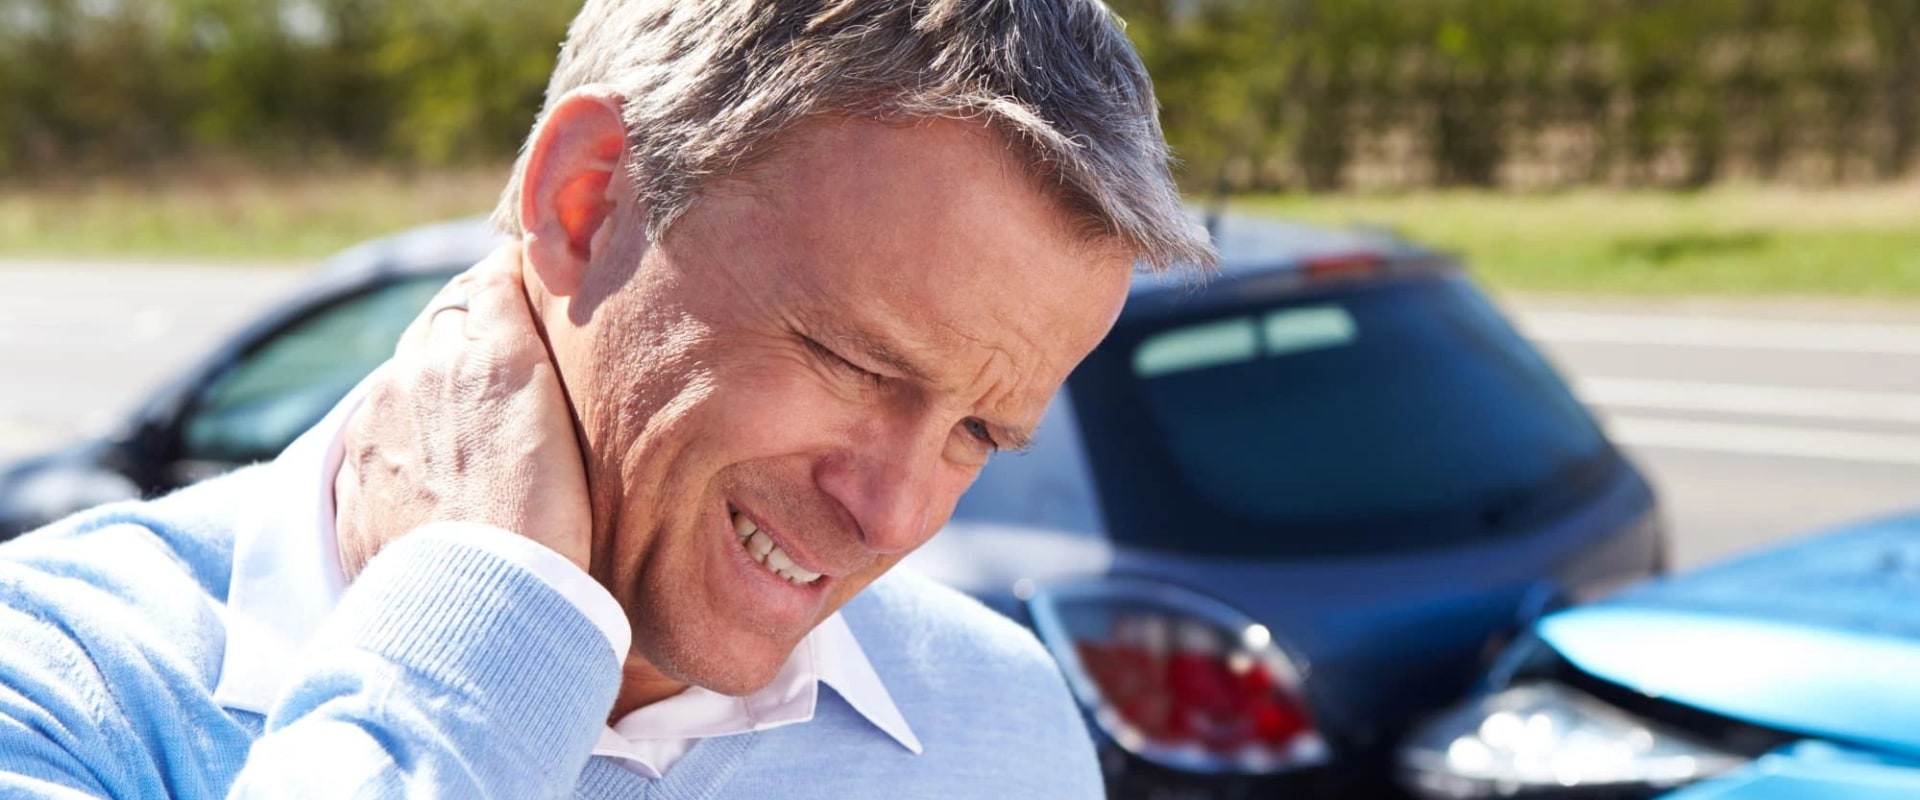 Can I Receive Other Forms of Medical Care After an Auto Accident Injury?